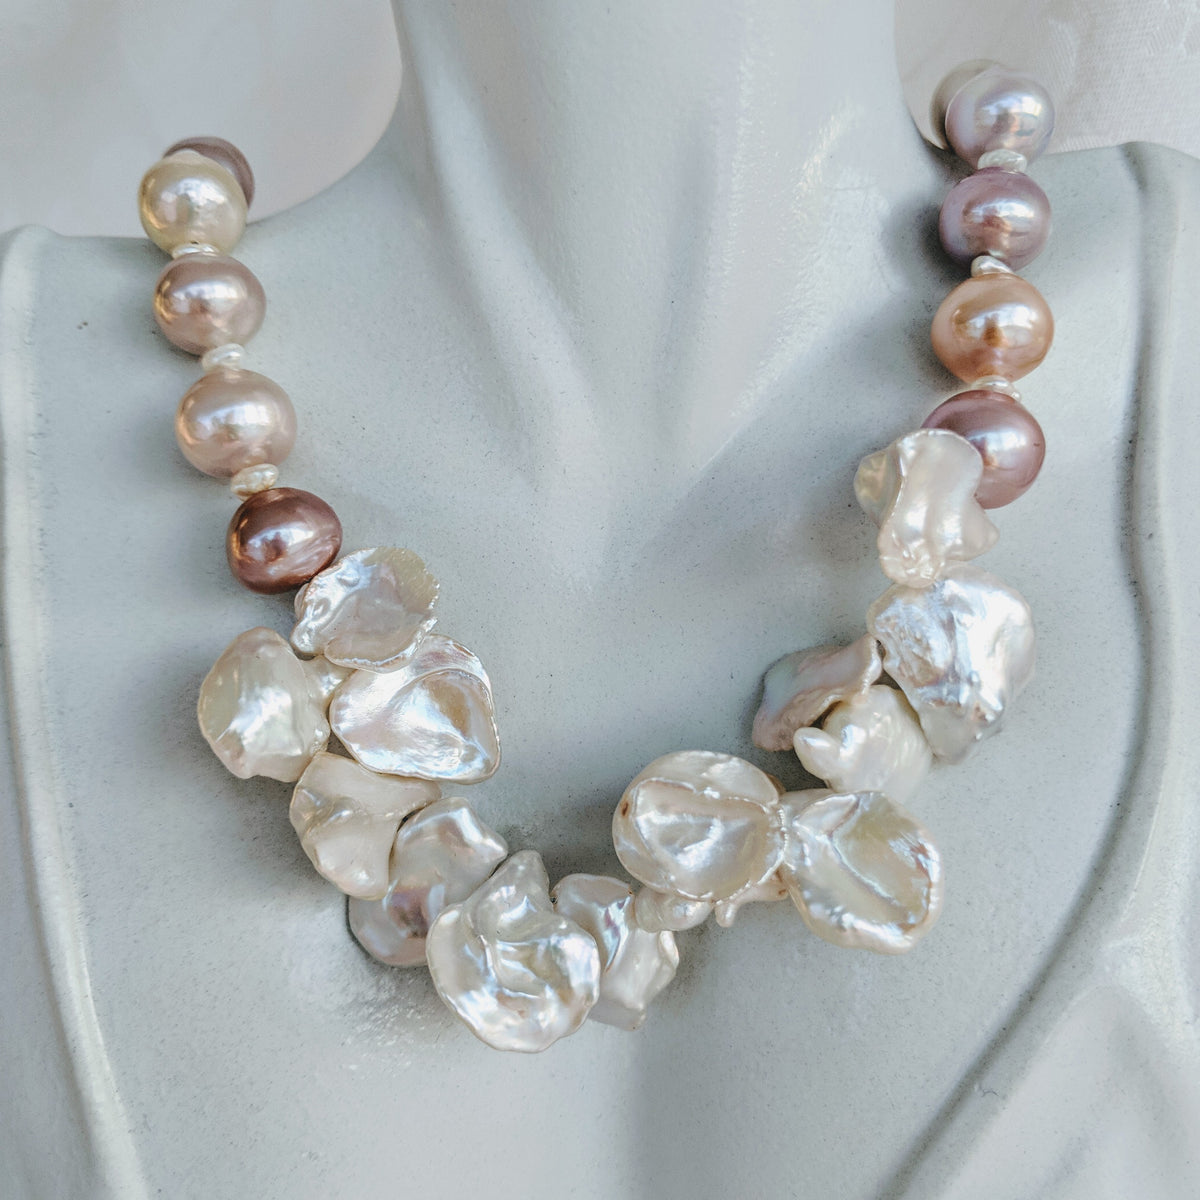 Double strand cultured freshwater pearl necklace – Barb McSweeney